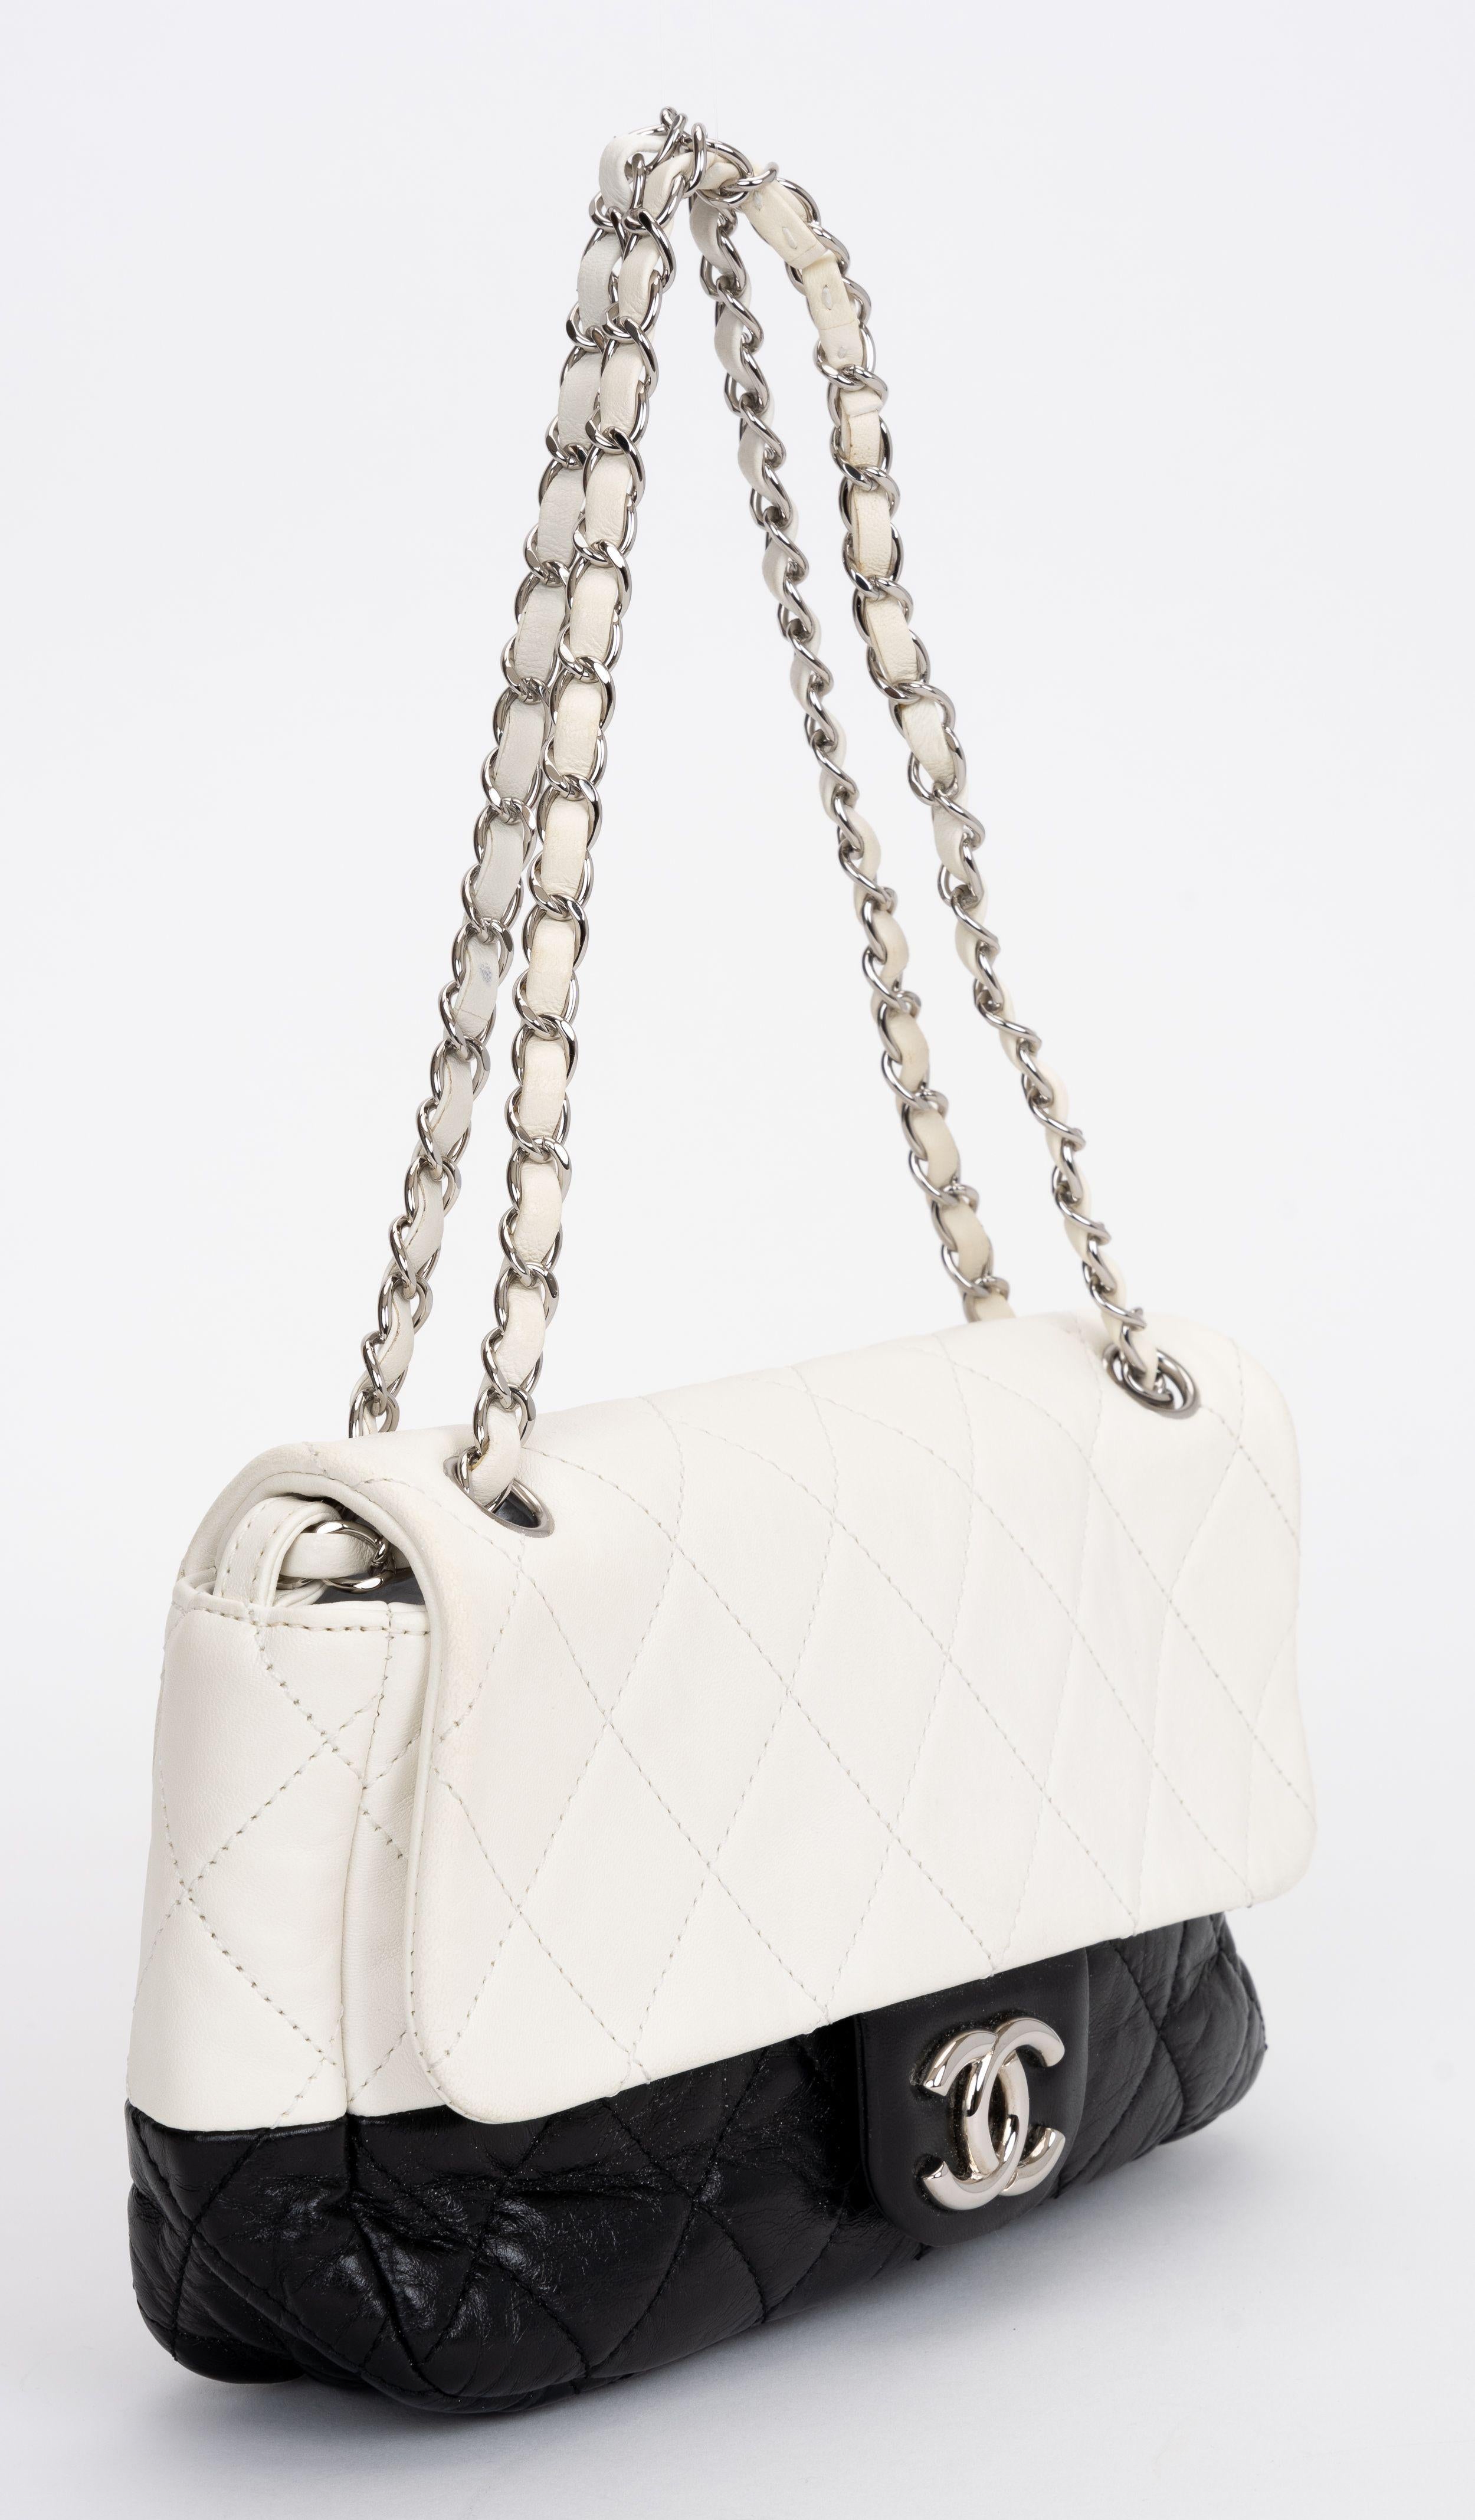 Chanel authentic Leather Crossbody Bag made from quilted lambskin in bi-color Black and White.
Shoulder drop 7.5